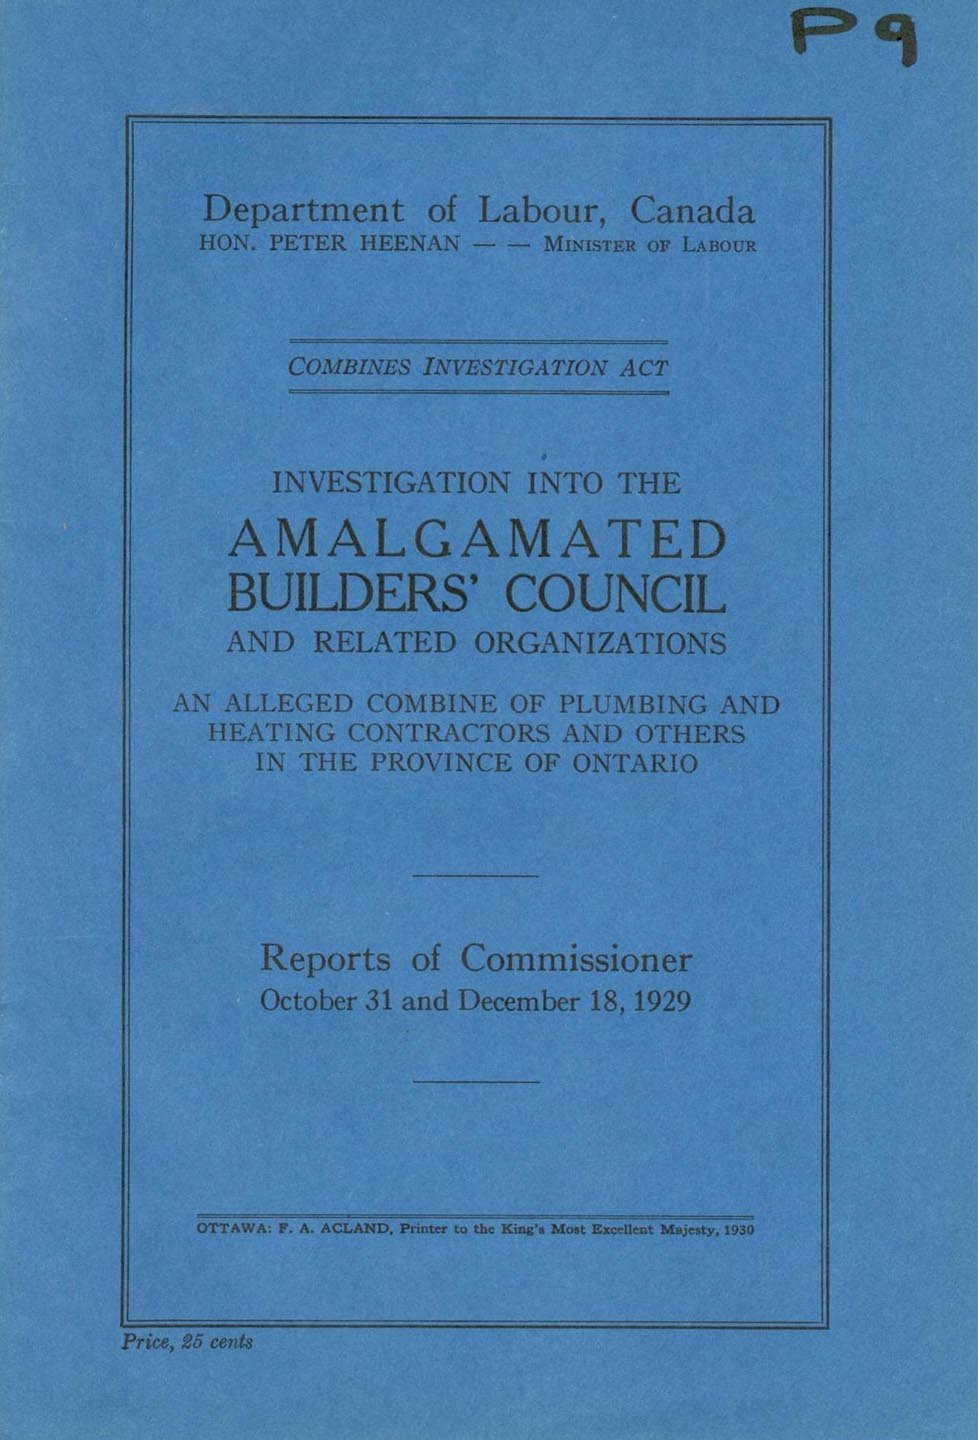 Investigation into the Amalgamated Builders' Council and Related Organizations